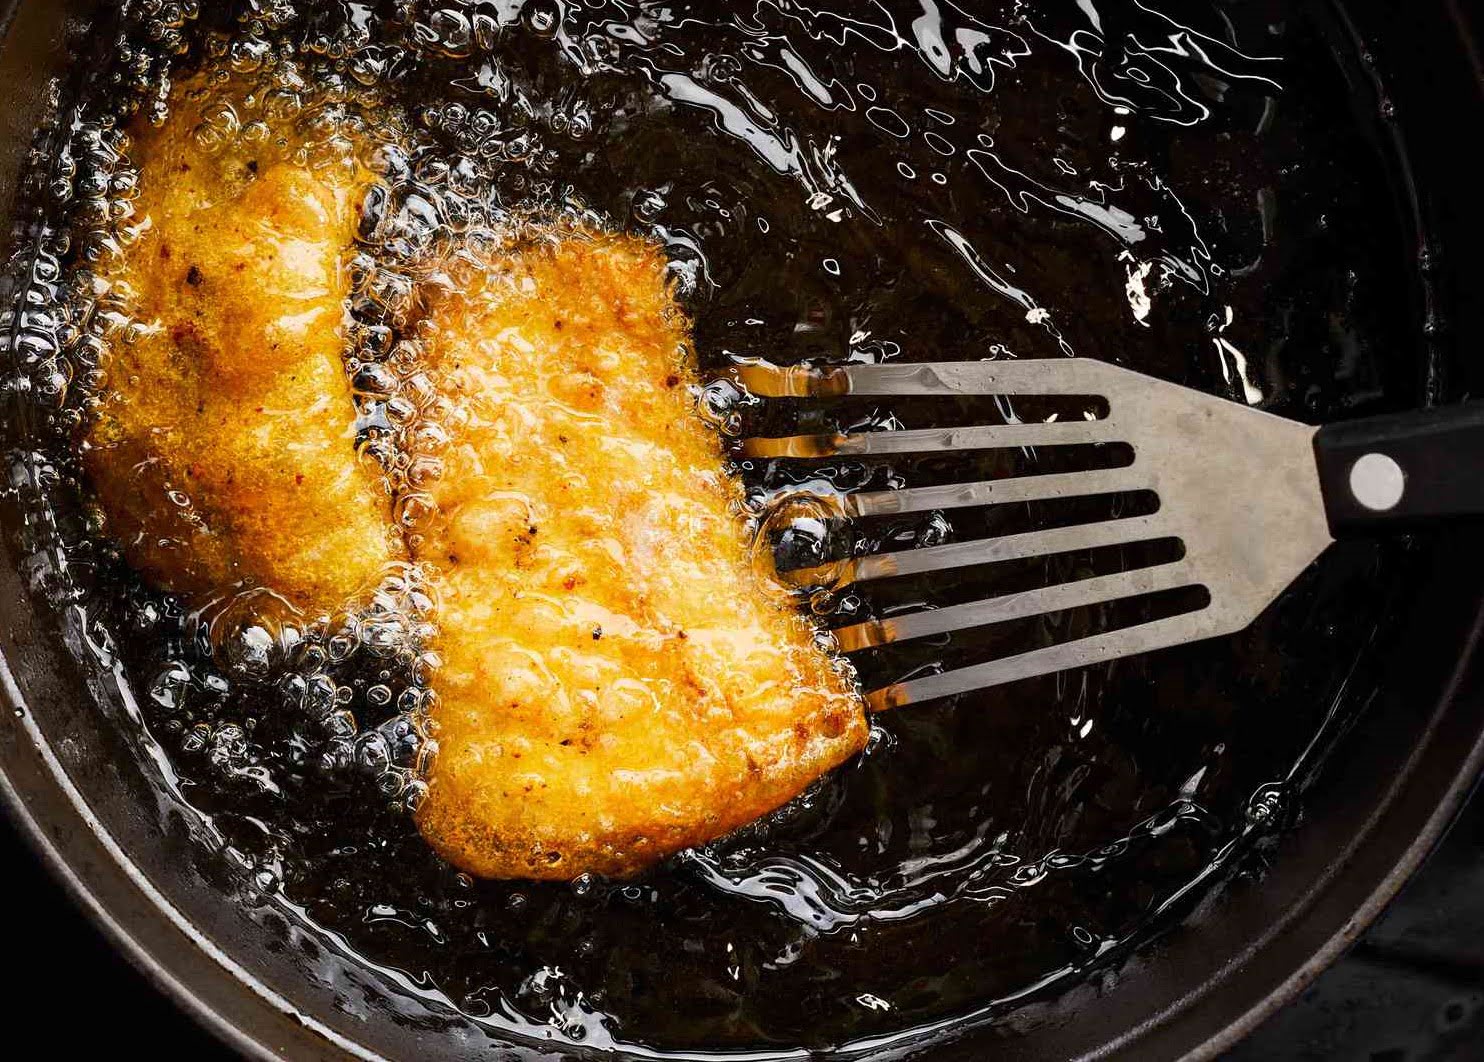 https://storables.com/wp-content/uploads/2023/07/how-to-deep-fry-in-an-electric-skillet-1690263048.jpg